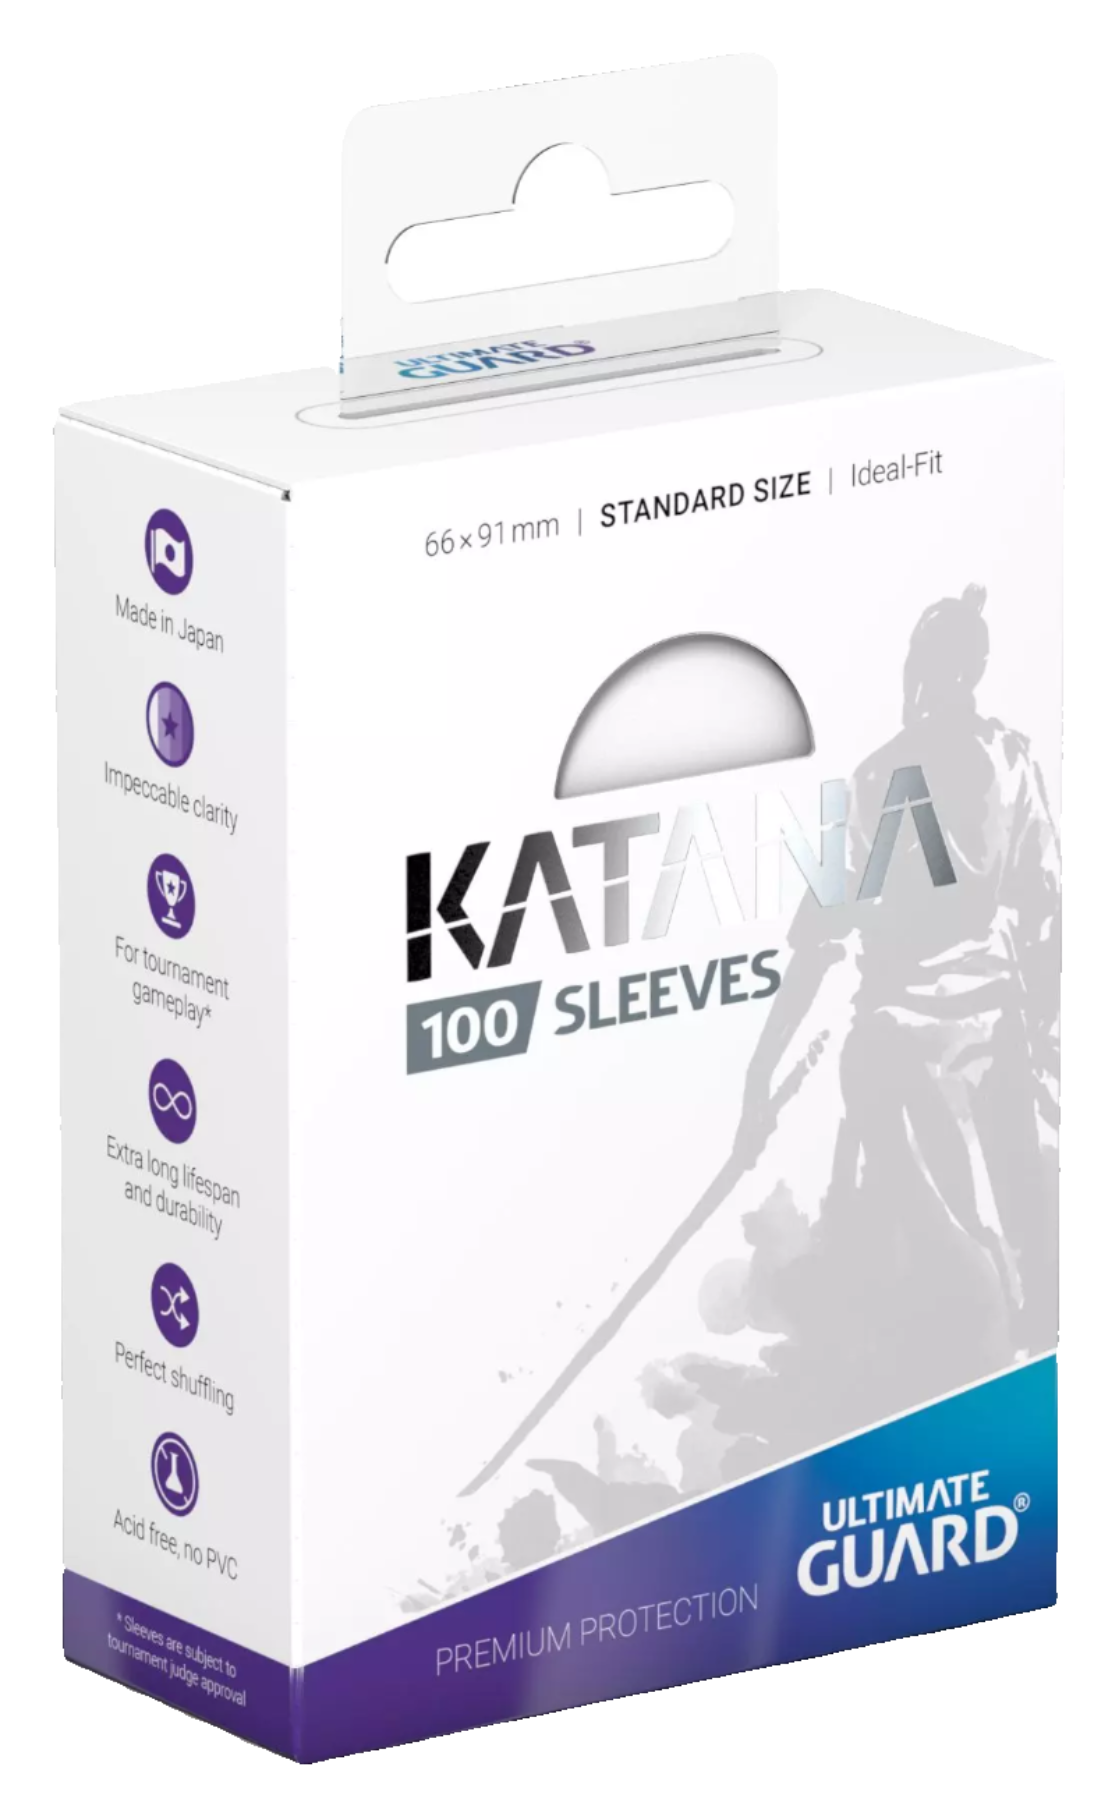 Ultimate Guard - Katana Sleeves - Standard Size - Ideal-Fit - White - 100pk